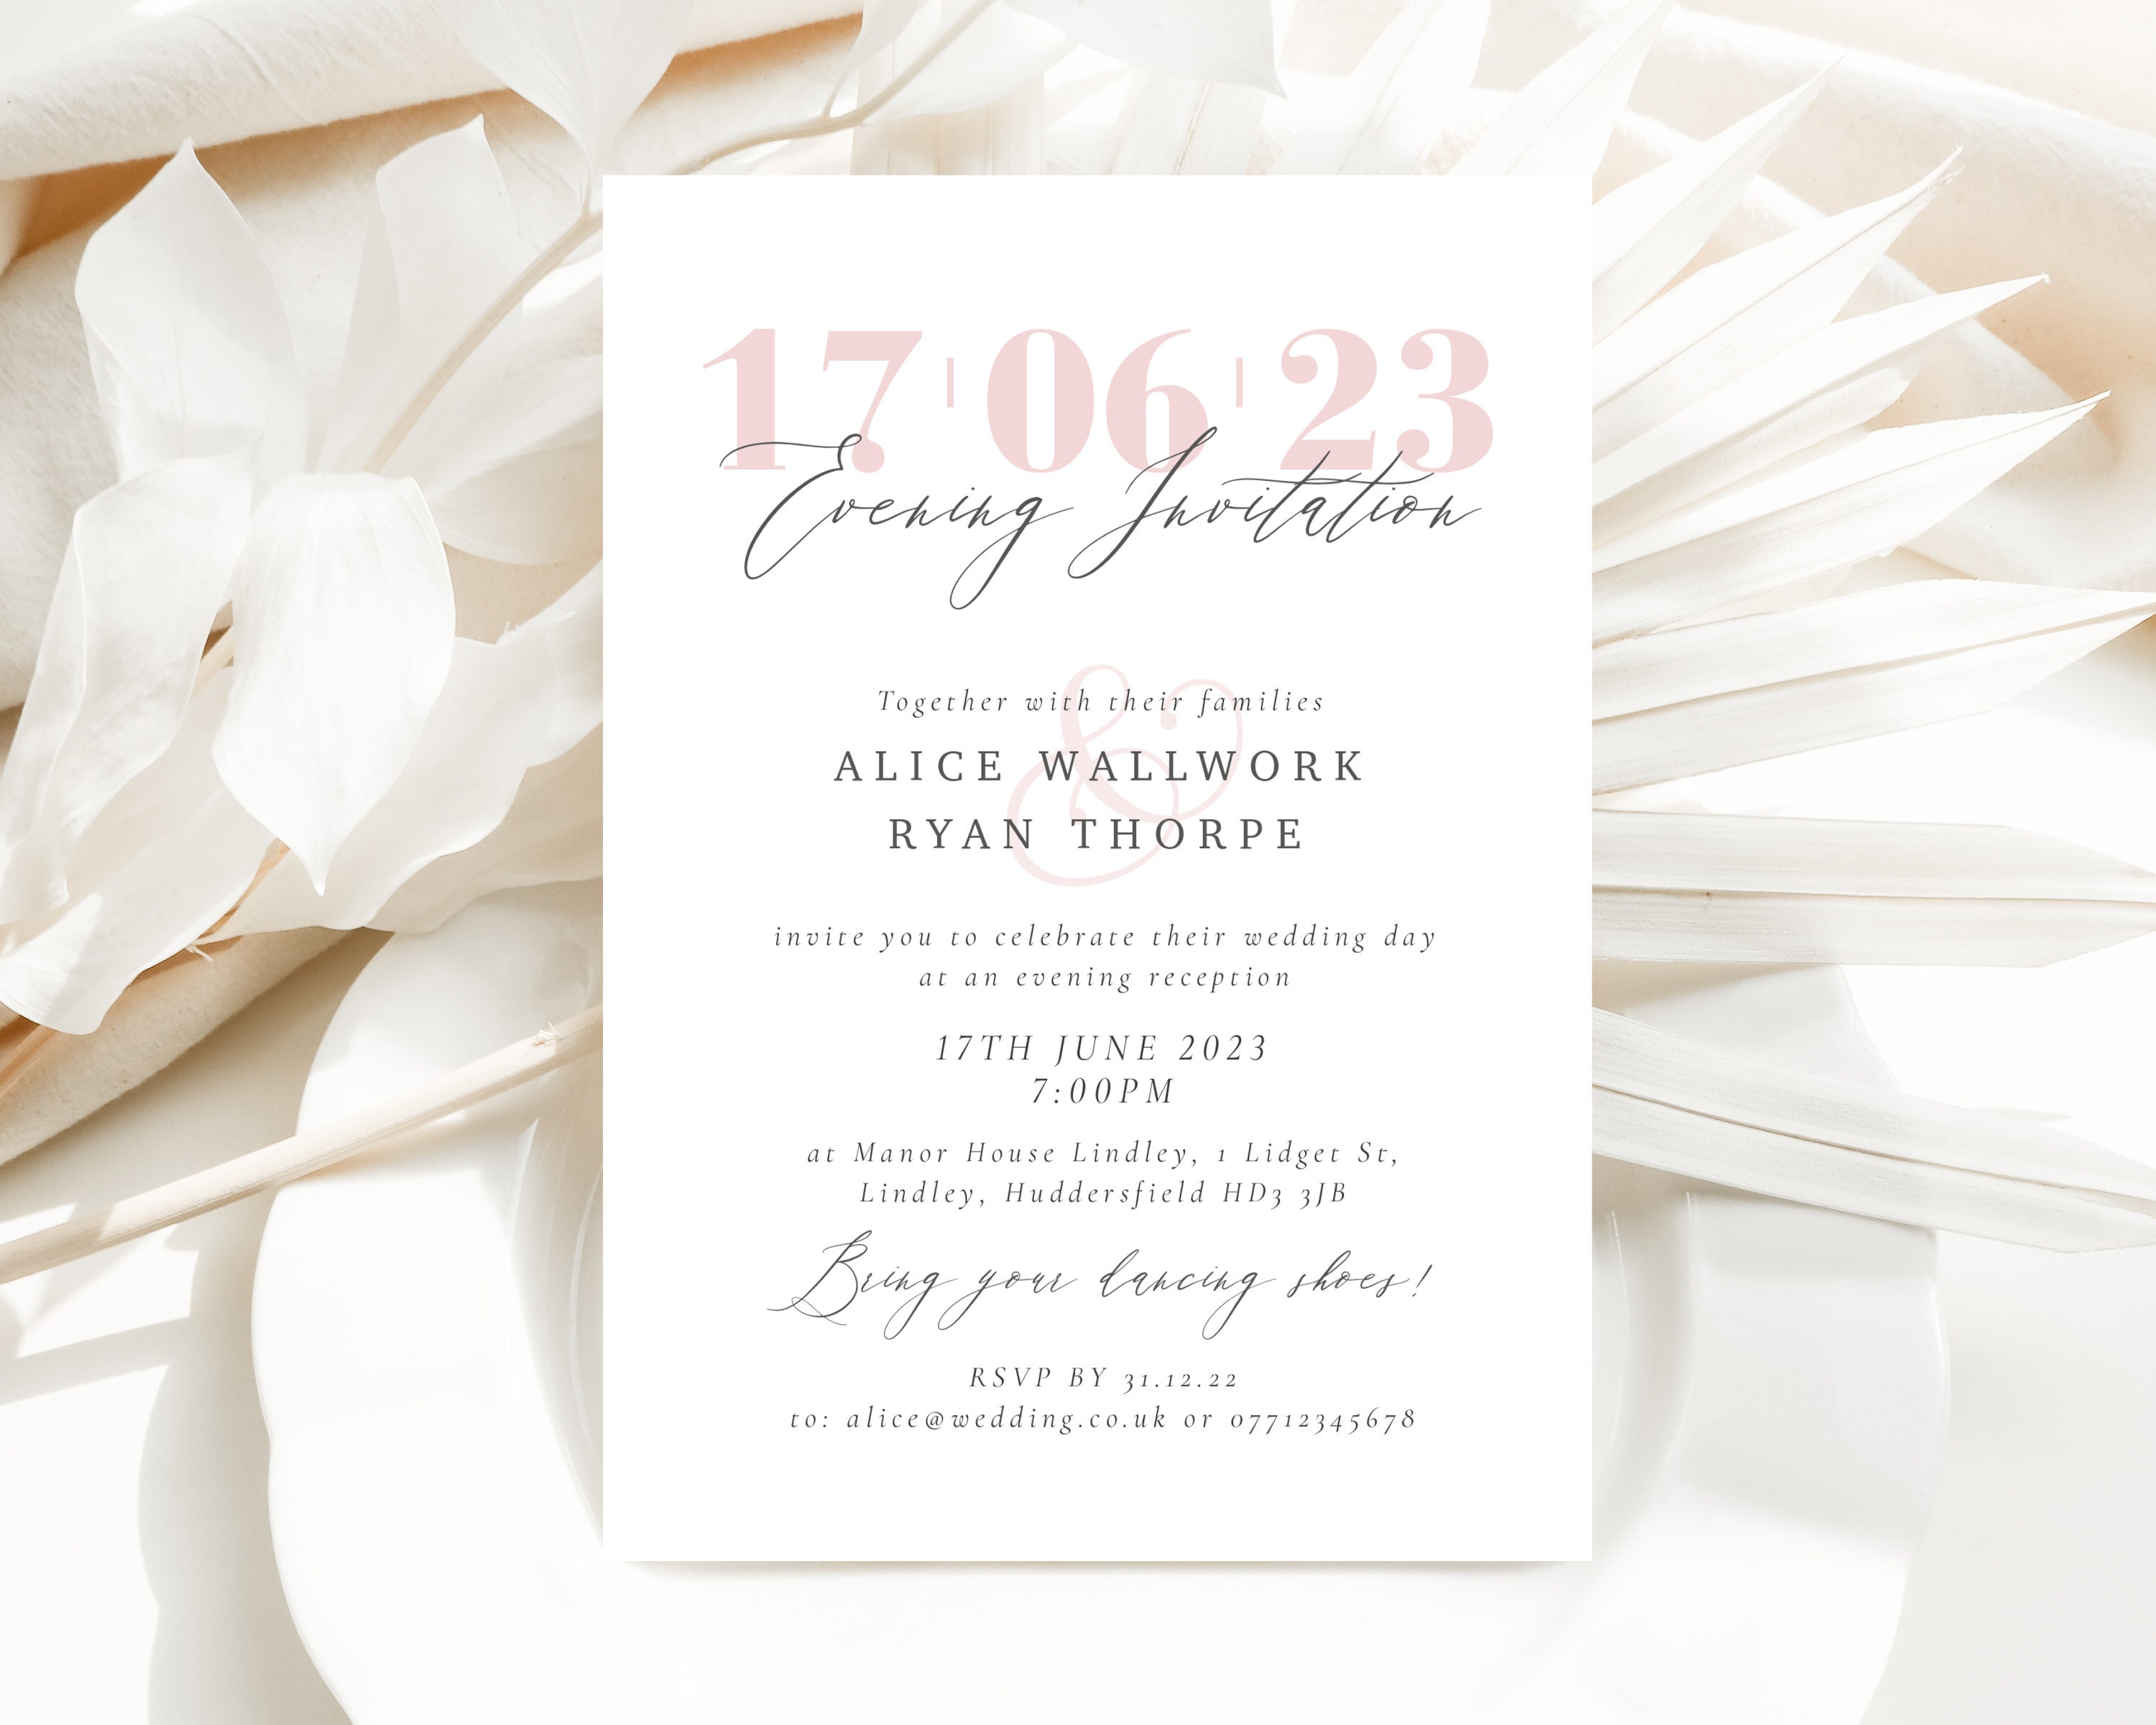 Blank Invitation Card With Envelopes A6 Blank Wedding 